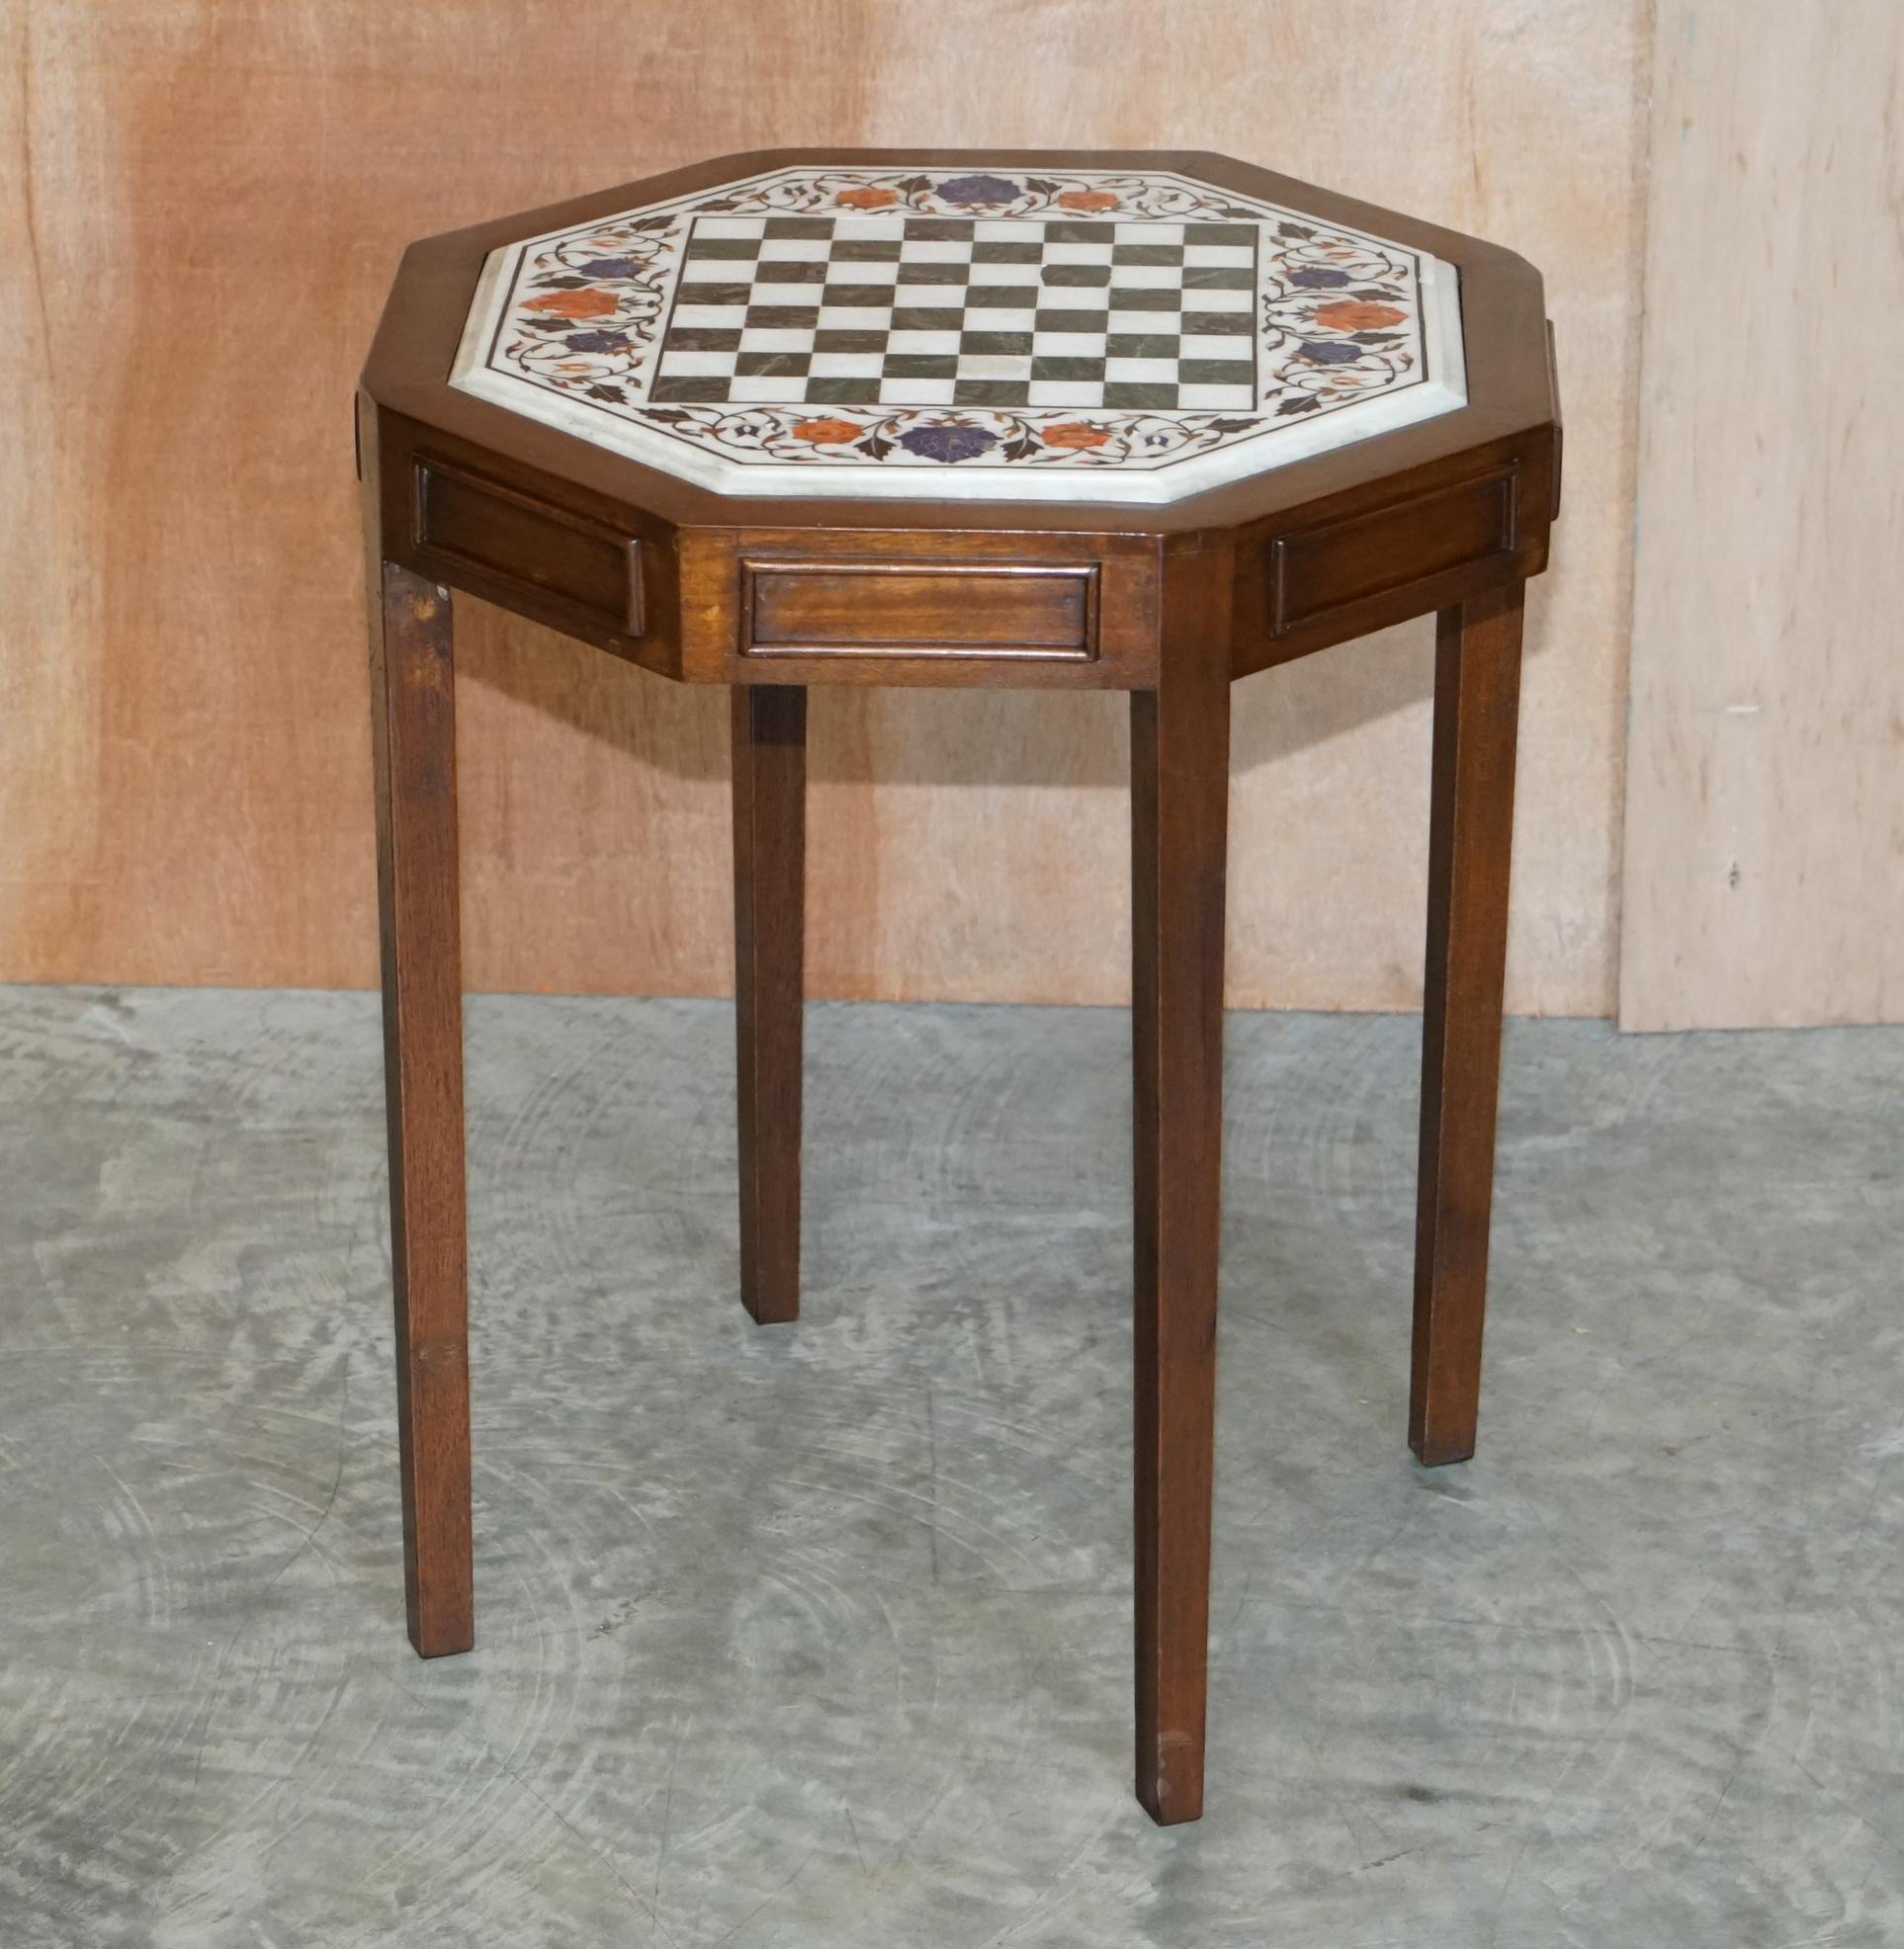 We are delighted to offer for sale this lovely antique Marble, hard stone, and mother of pearl inlaid Chess table 

A very rare find, the top is exceptionally decorative with some wonderfully colourful stones used in the form of floral motifs